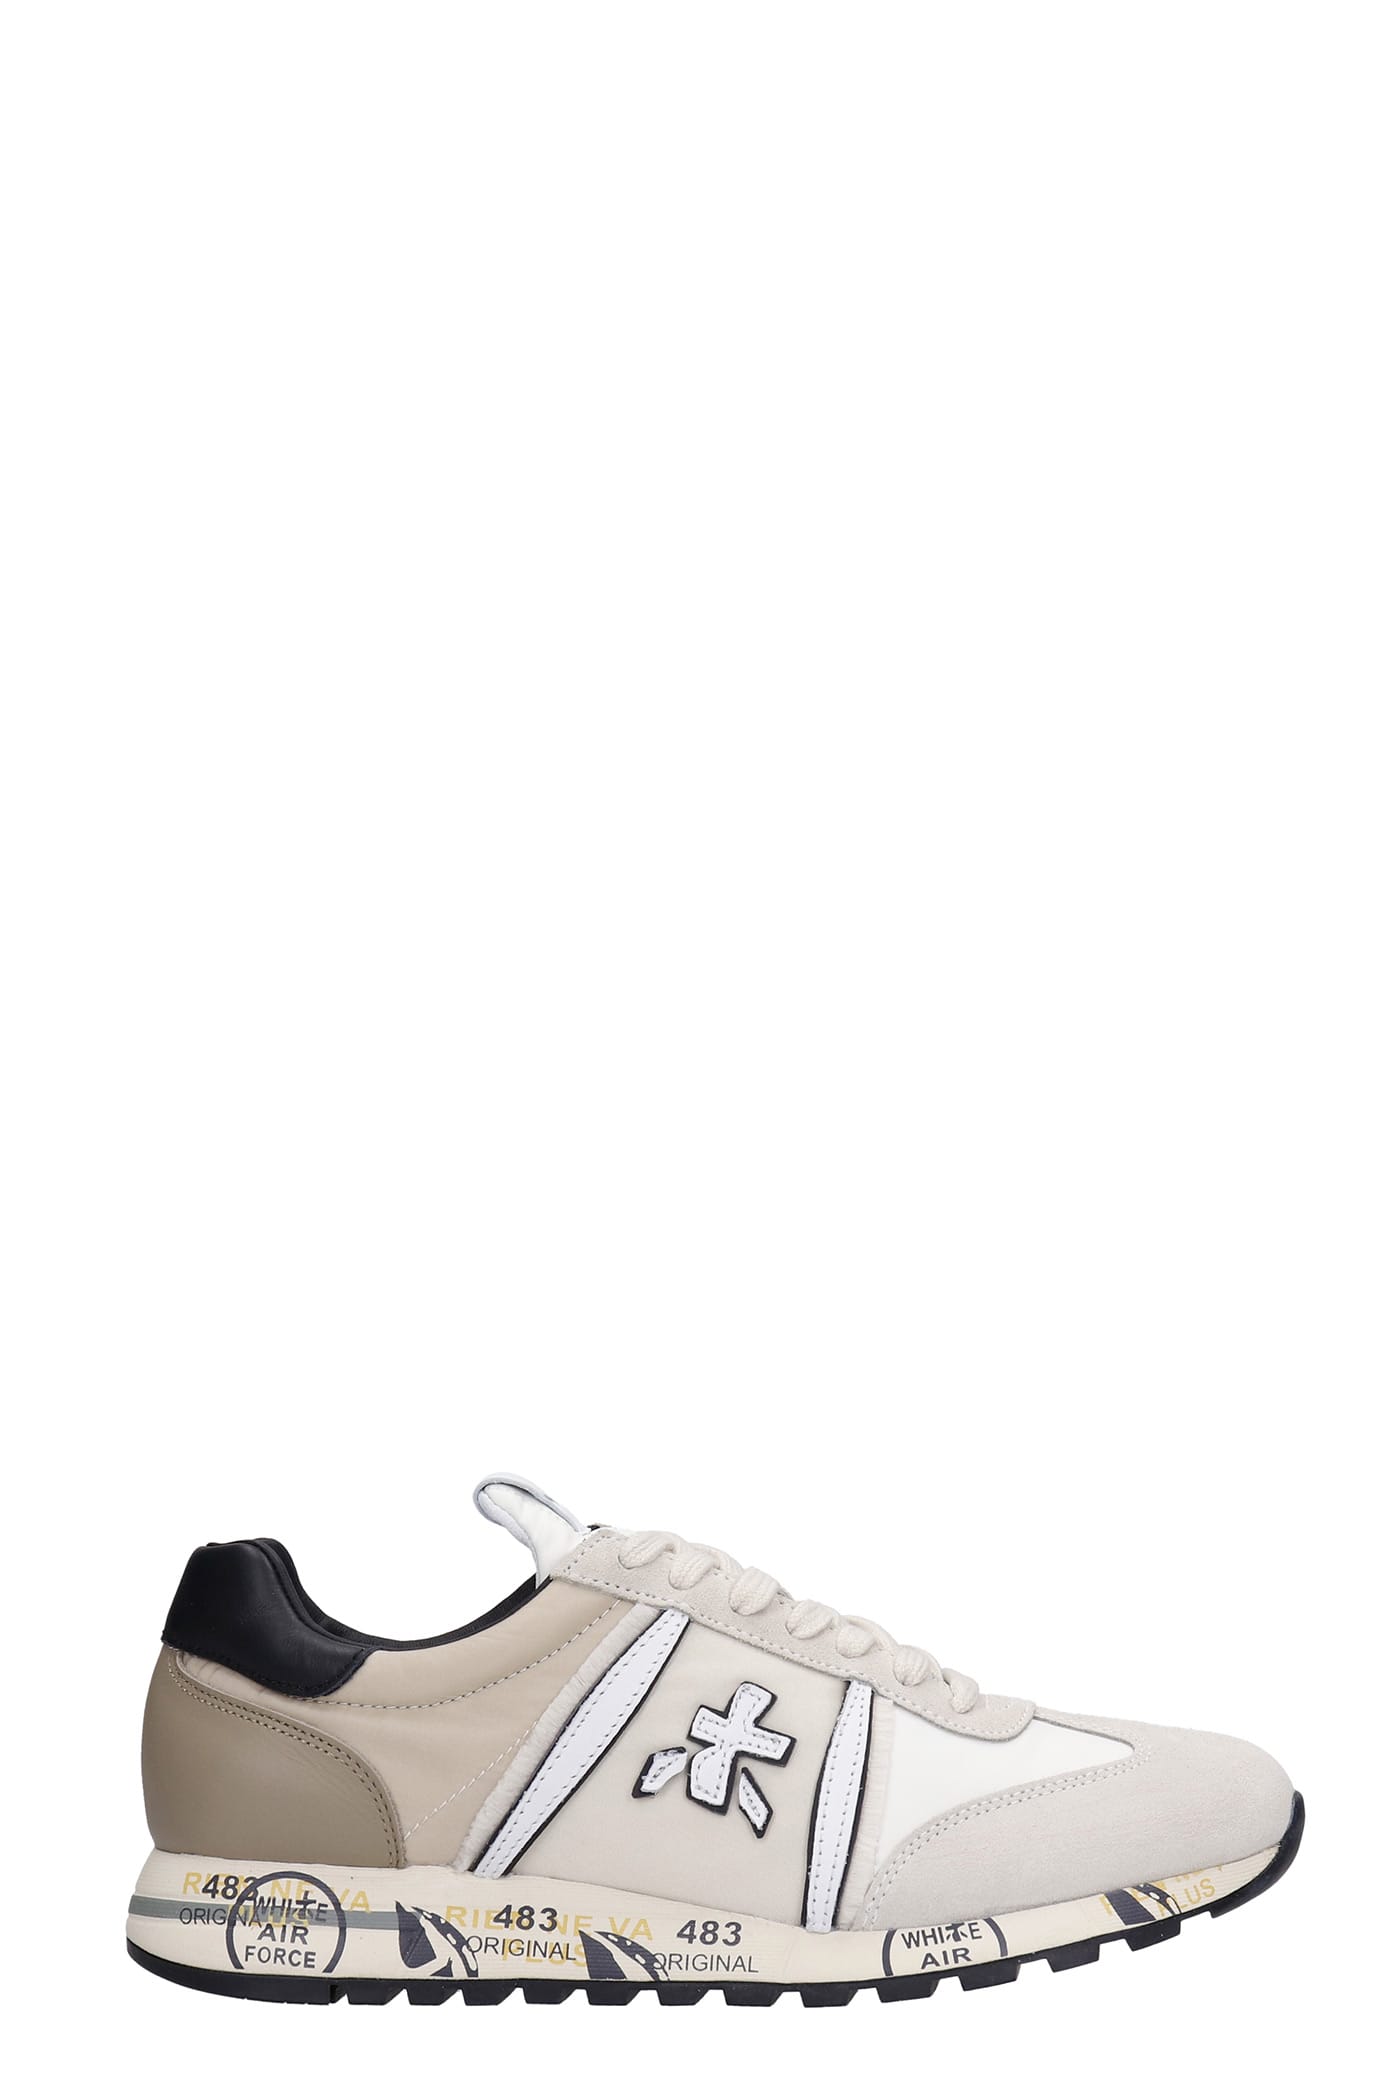 Premiata Lucy Sneakers In Beige Suede And Fabric